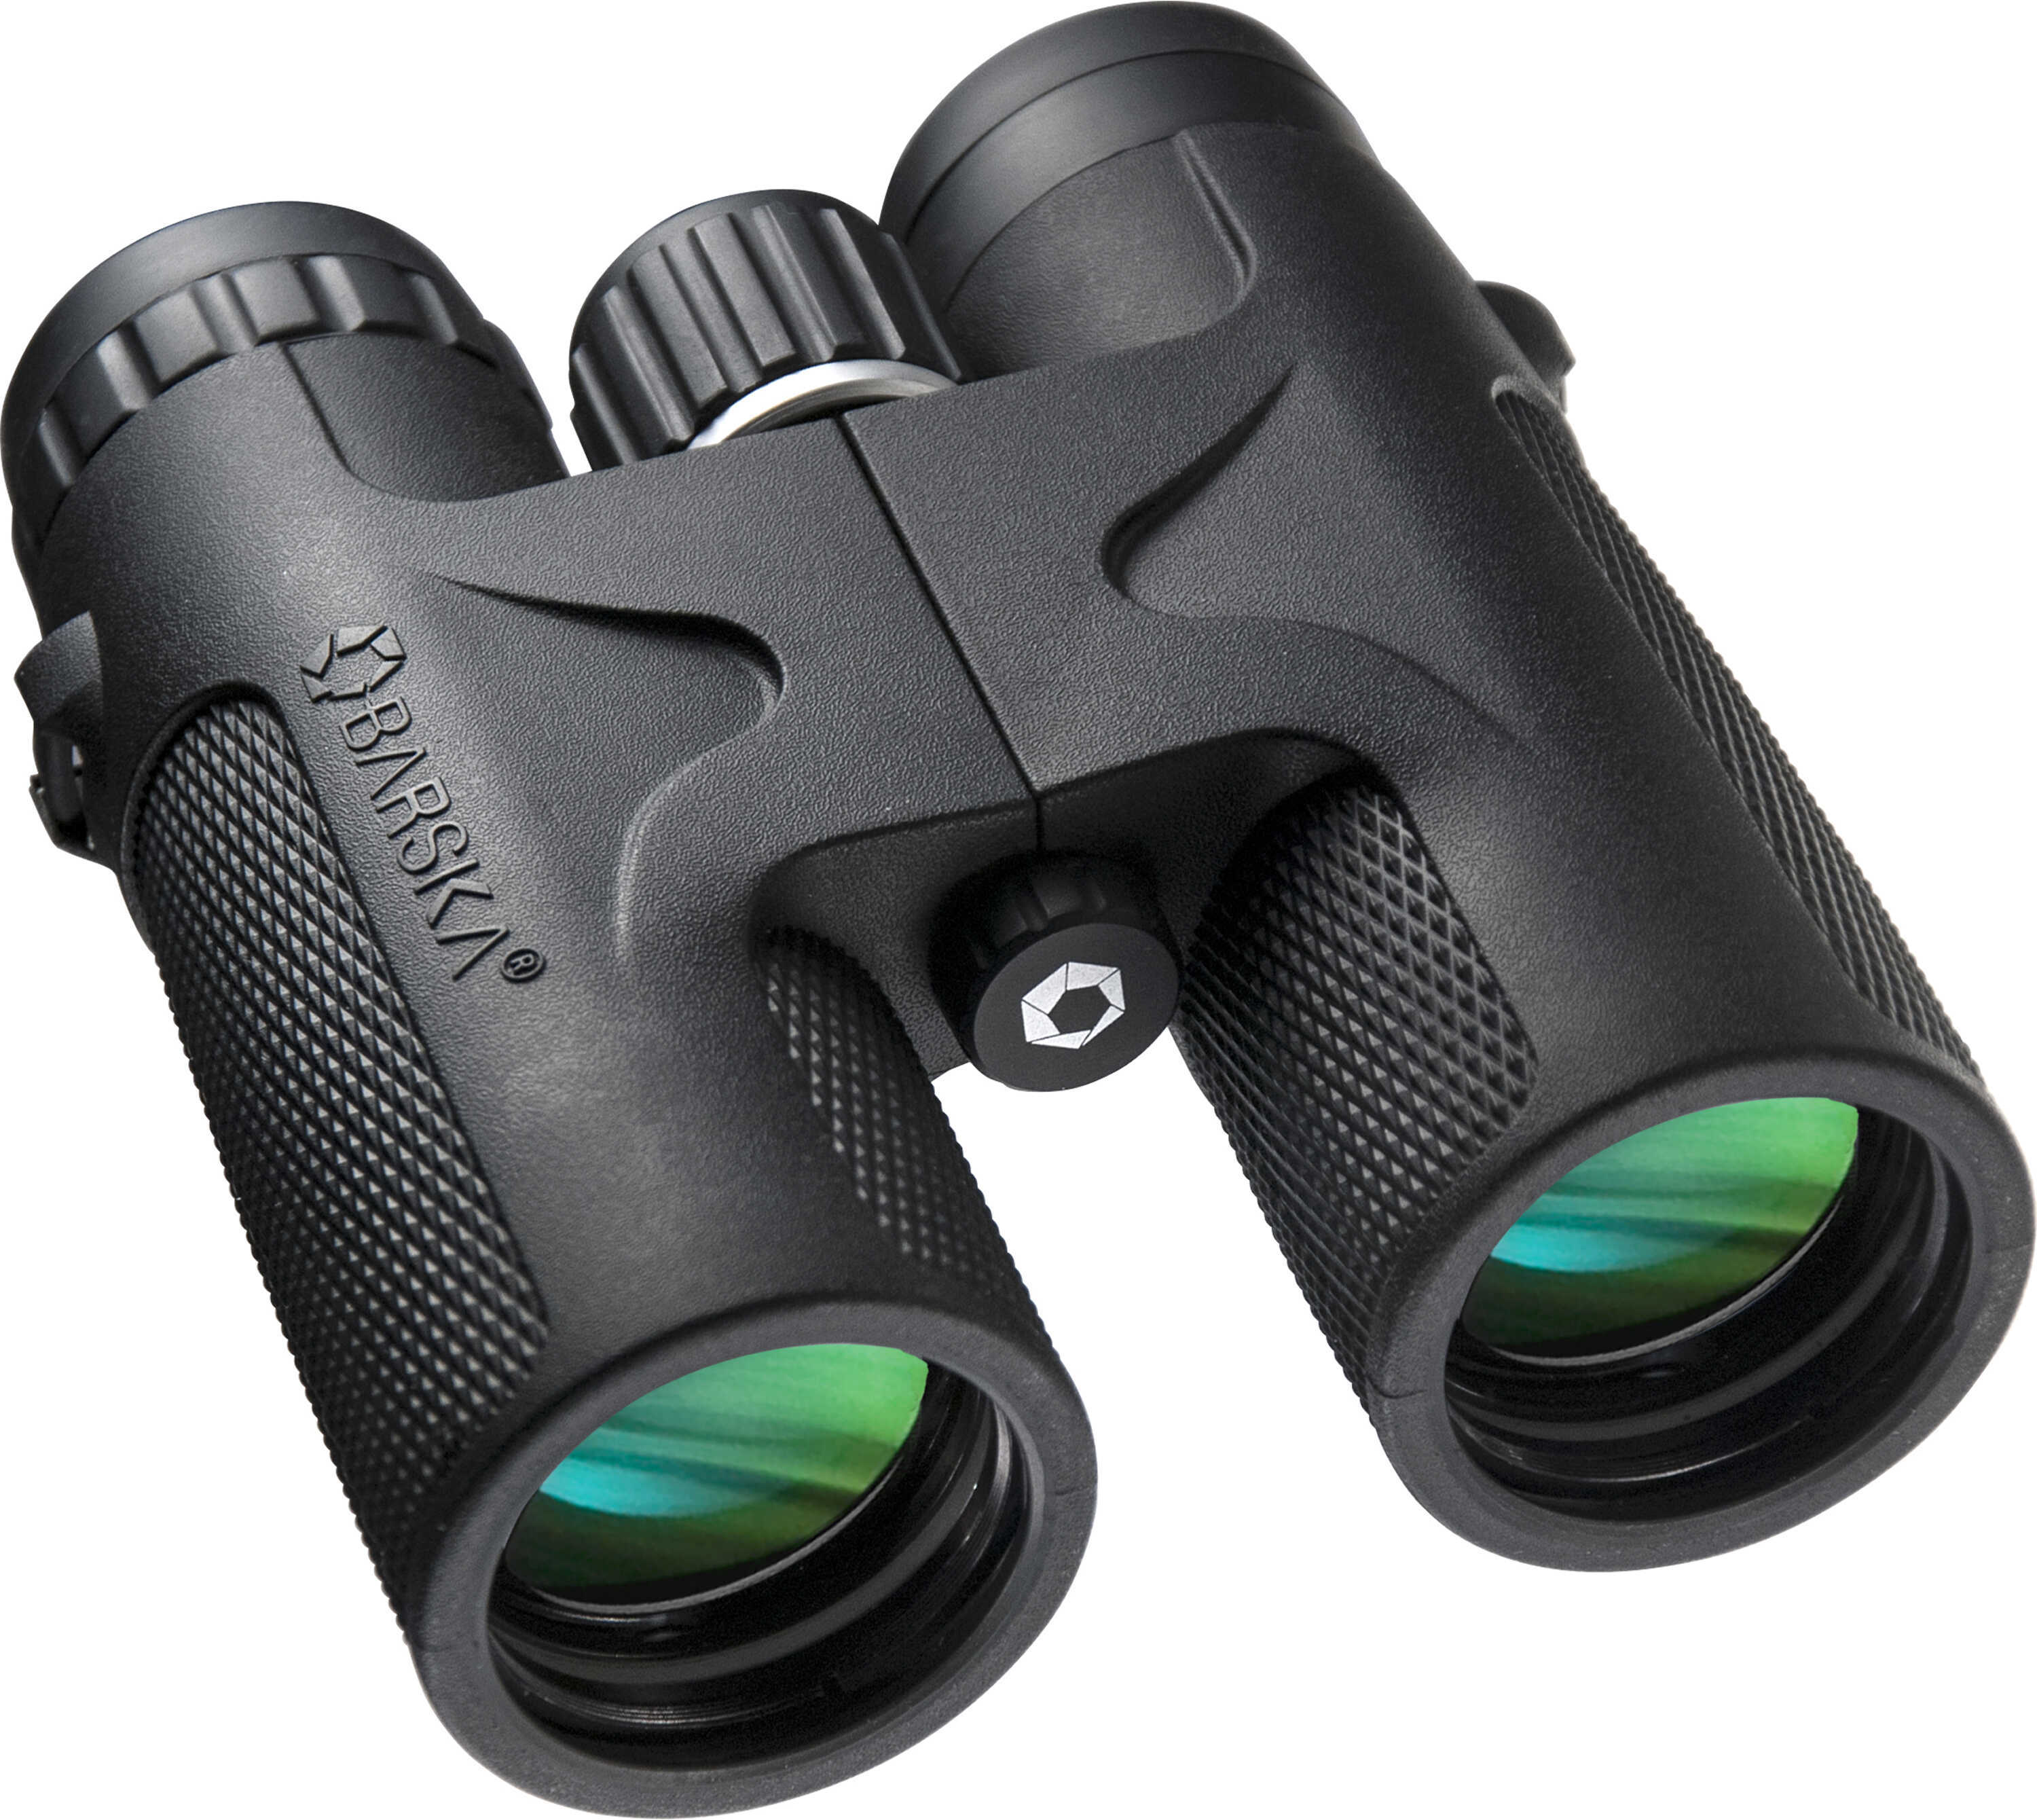 Barska Blackhawk Binoculars 12x42 Matte Finish Includes Carrying Case Lens Covers Neck Strap and Cloth AB11840